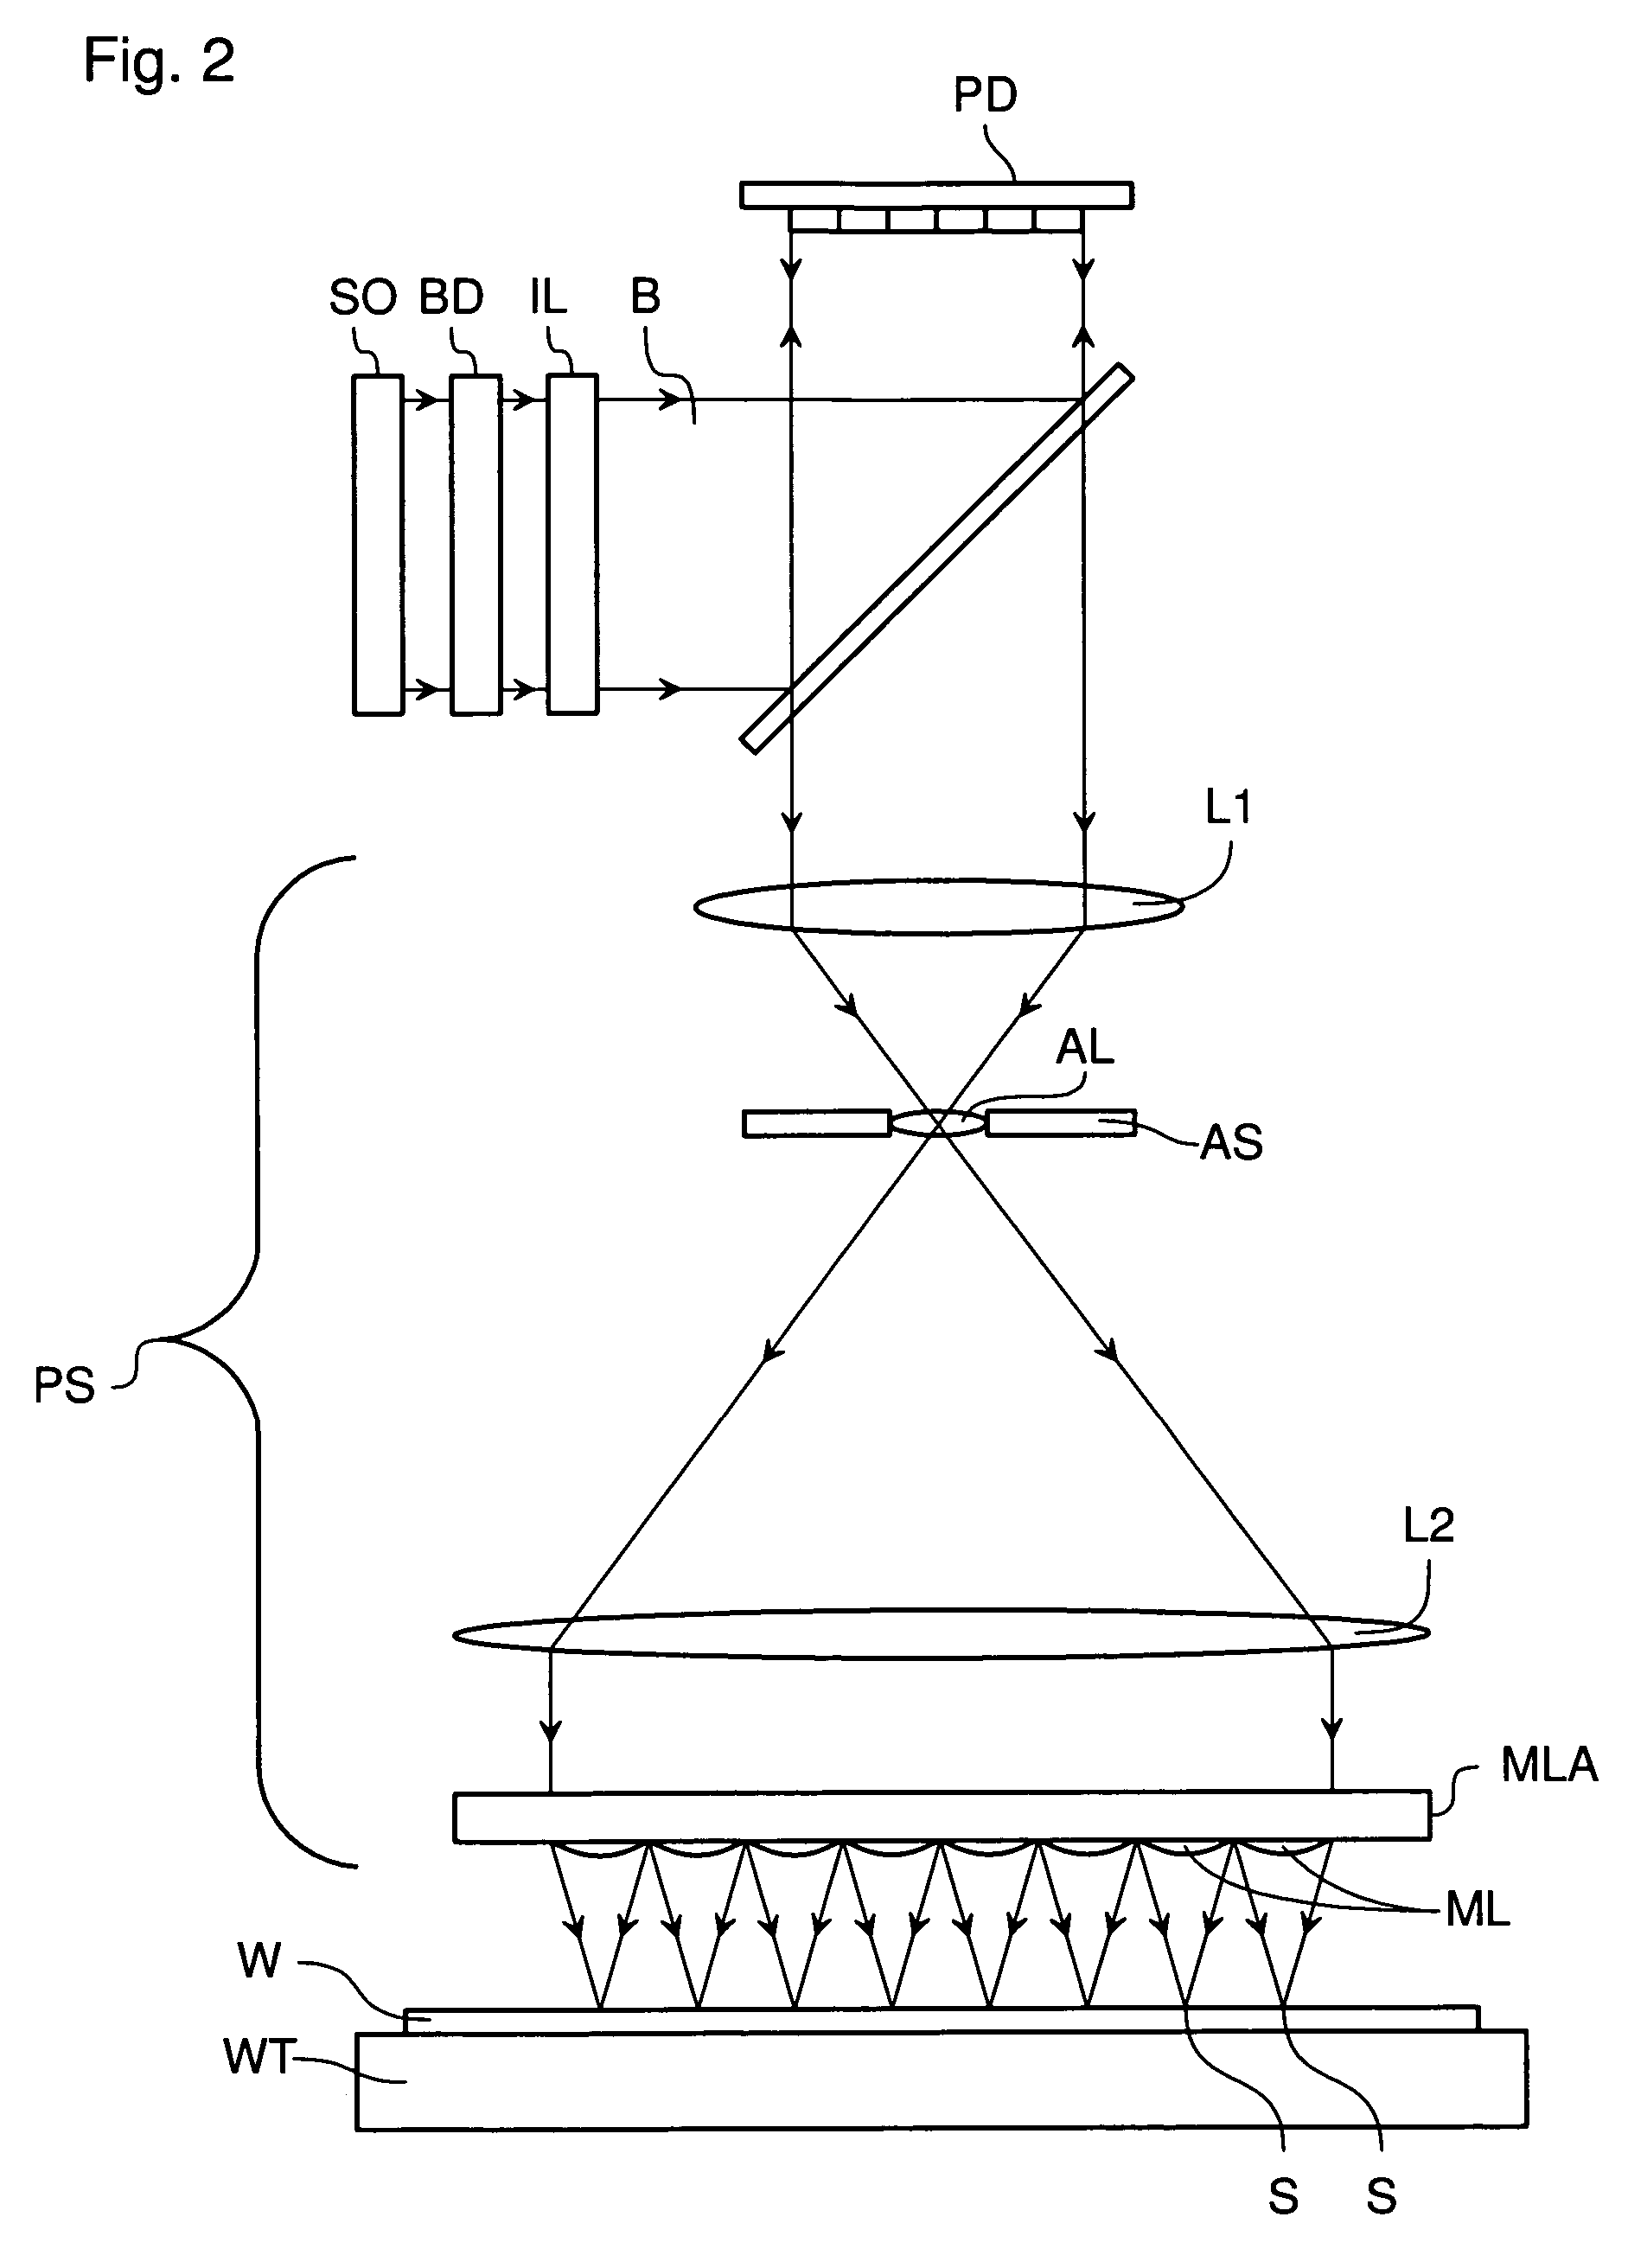 System and method for compensating for radiation induced thermal distortions